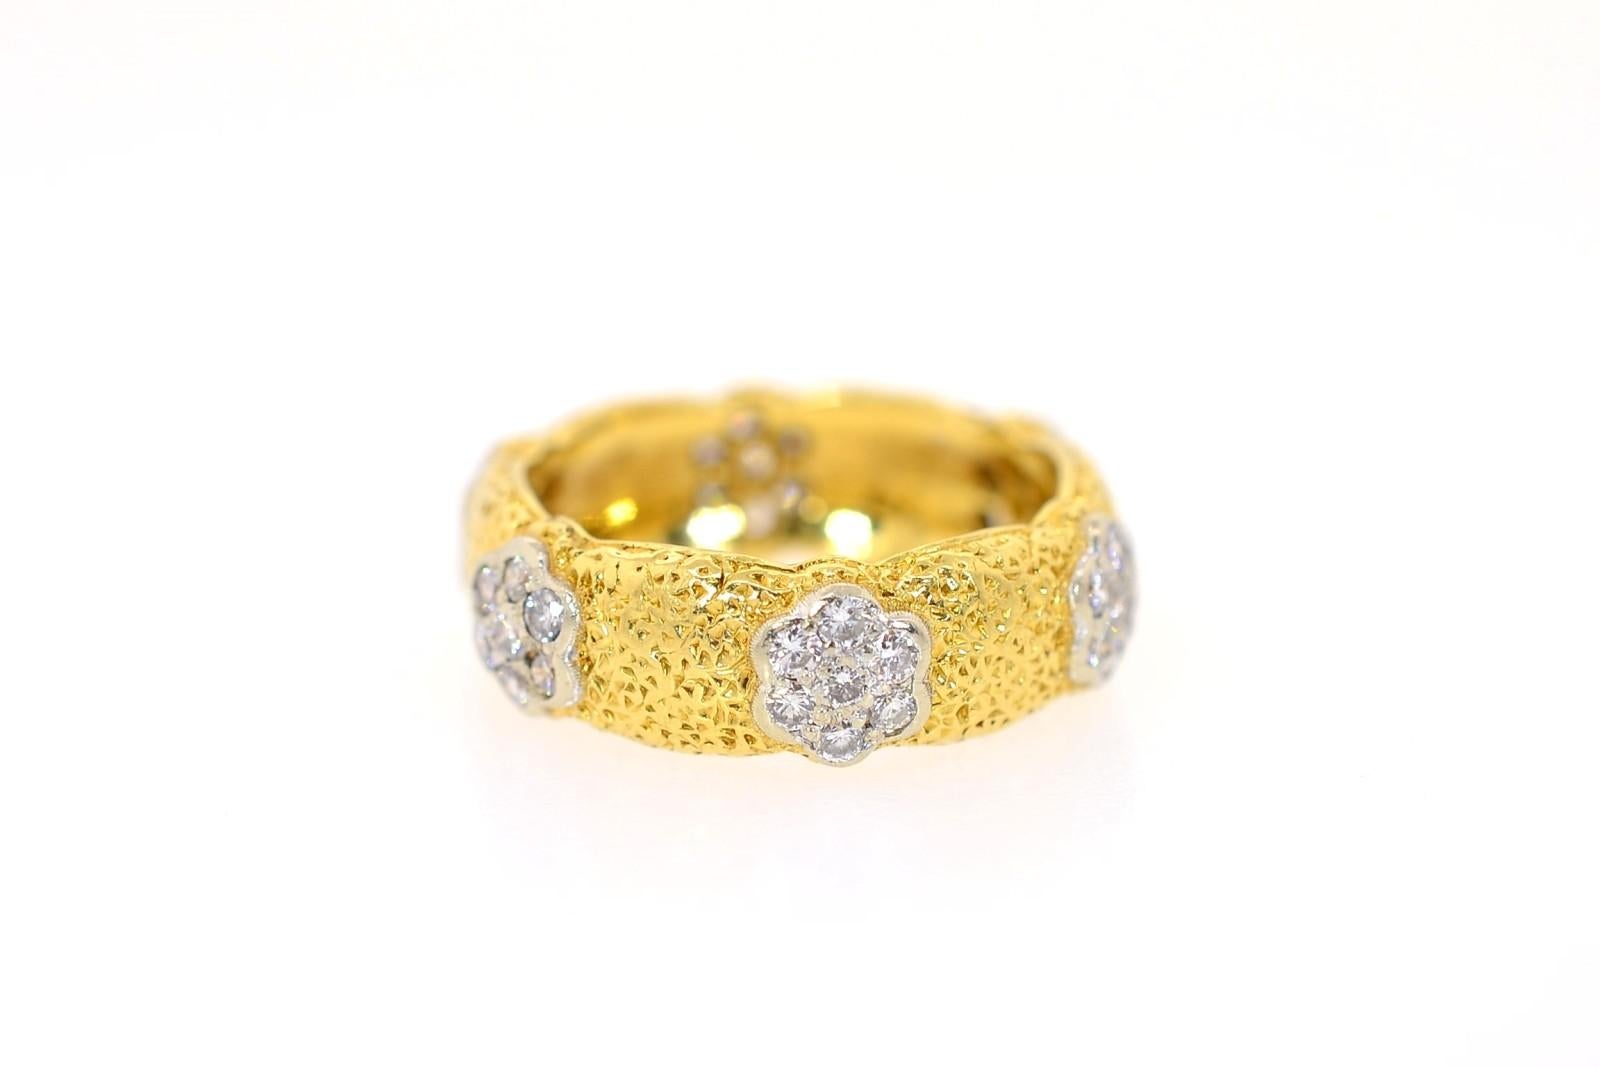 The craftsman of Buccellati created this beautiful band of 18KT yellow gold.  Six clusters of Round Diamonds totaling 0.80 carat, set in white gold highlight the ring and add sparkle.  The texture is iconic Buccellati hand engraving and the rim is